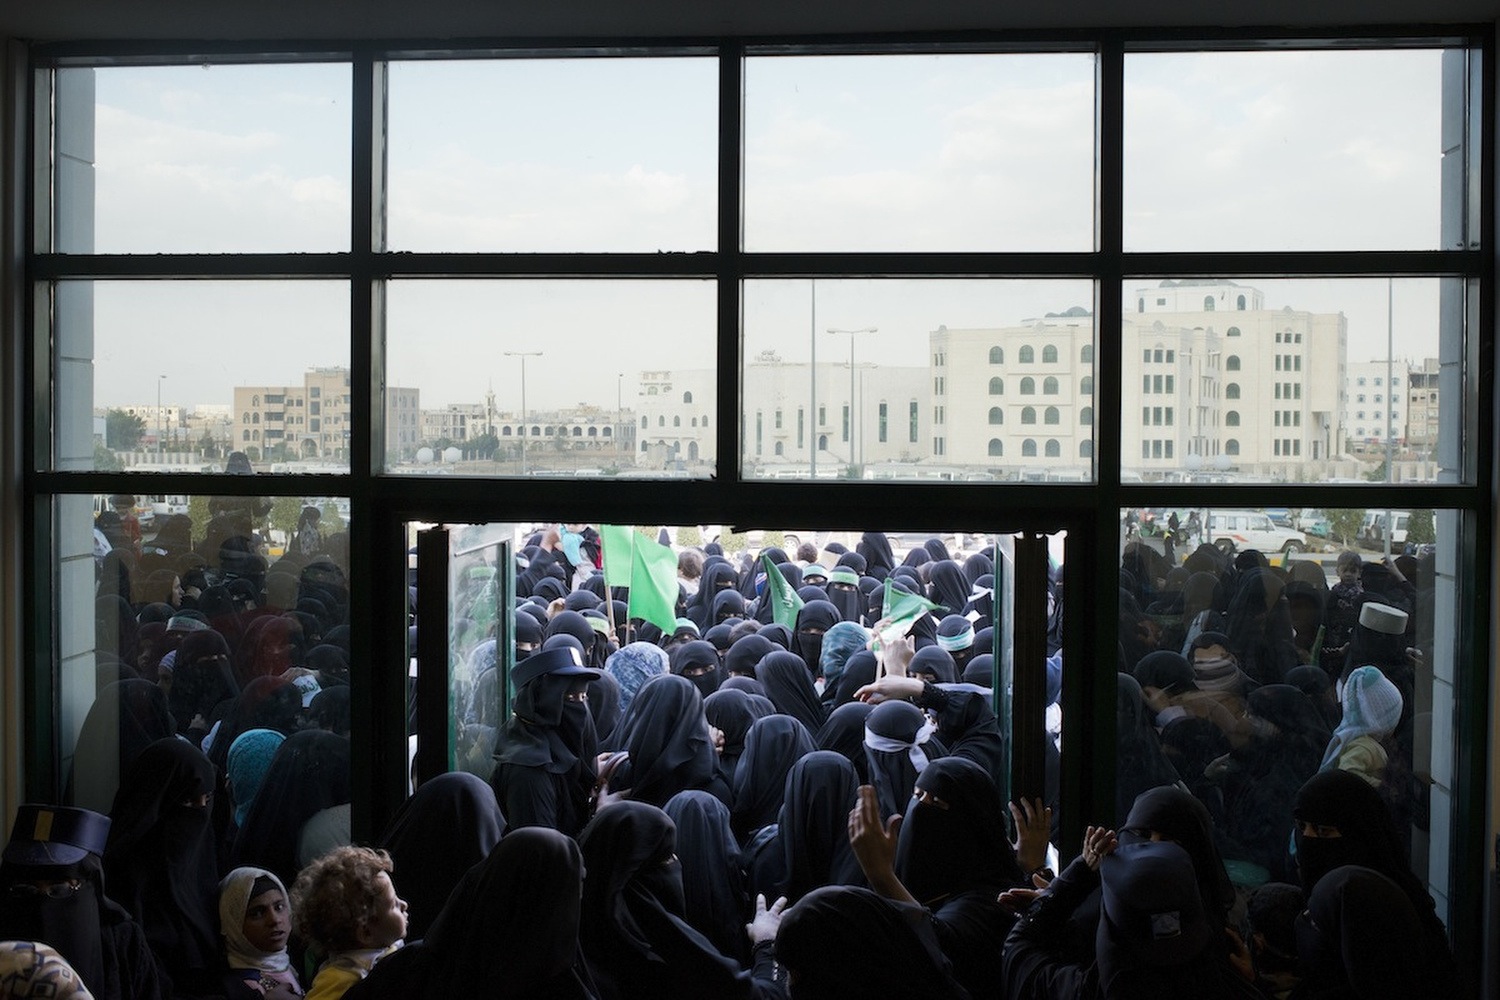 Yemeni women, who are kept separate at public gatherings, squeeze their way through a narrow doorway into a closed stadium for a religious and political rally put on by the Houthis. 